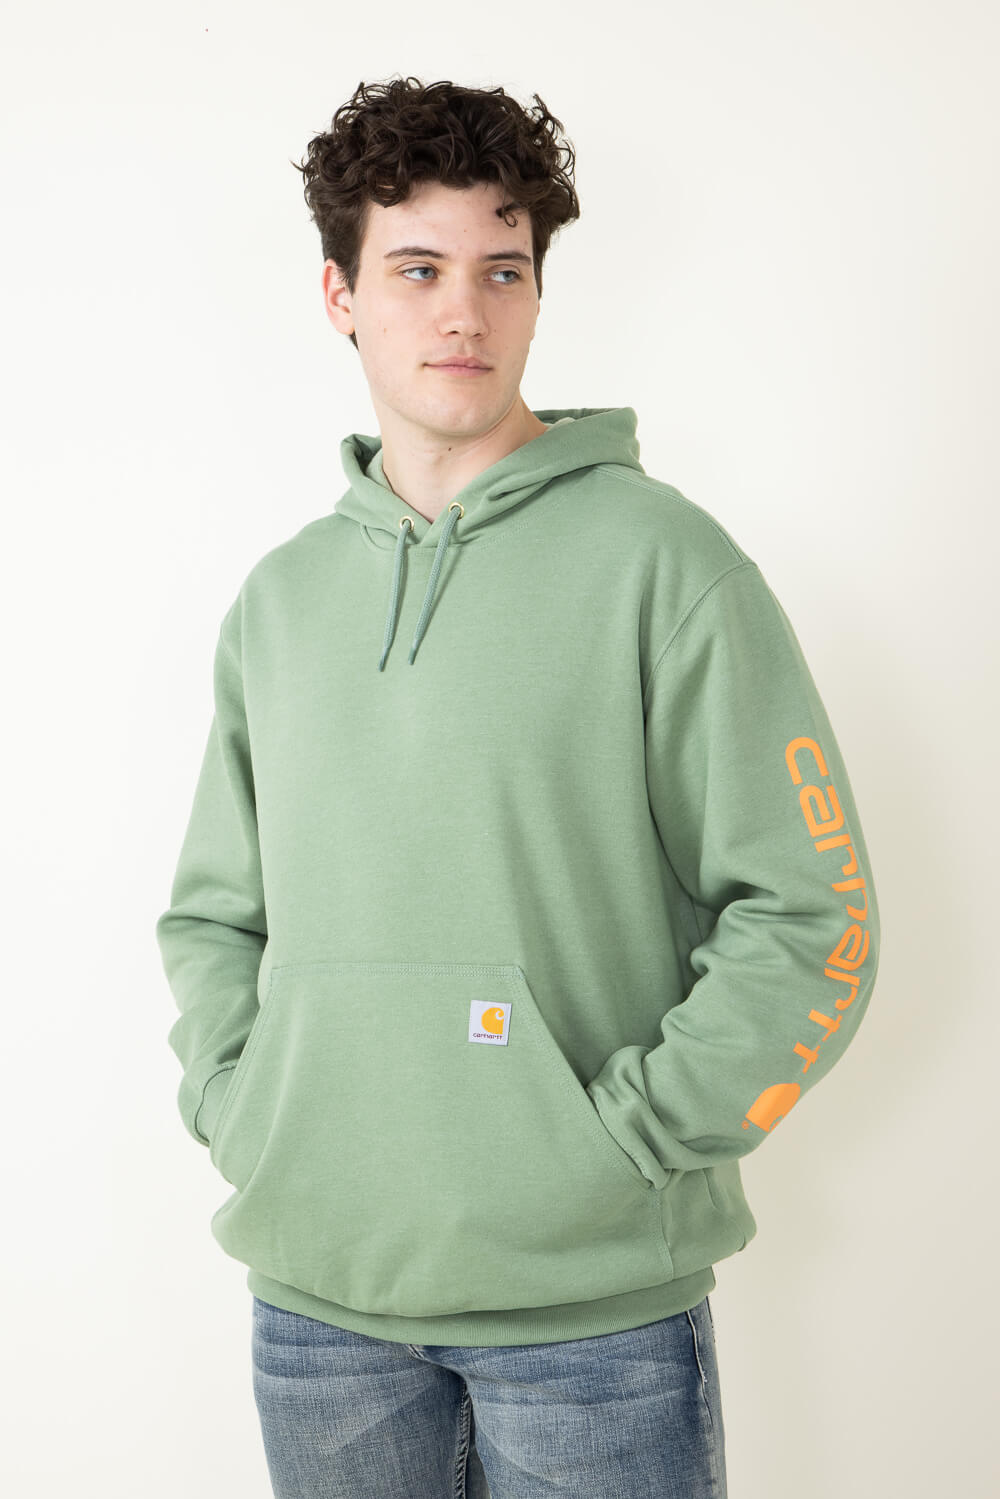 Carhartt Loose Fit Midweight Logo Sleeve Graphic Sweatshirt for Men in Green